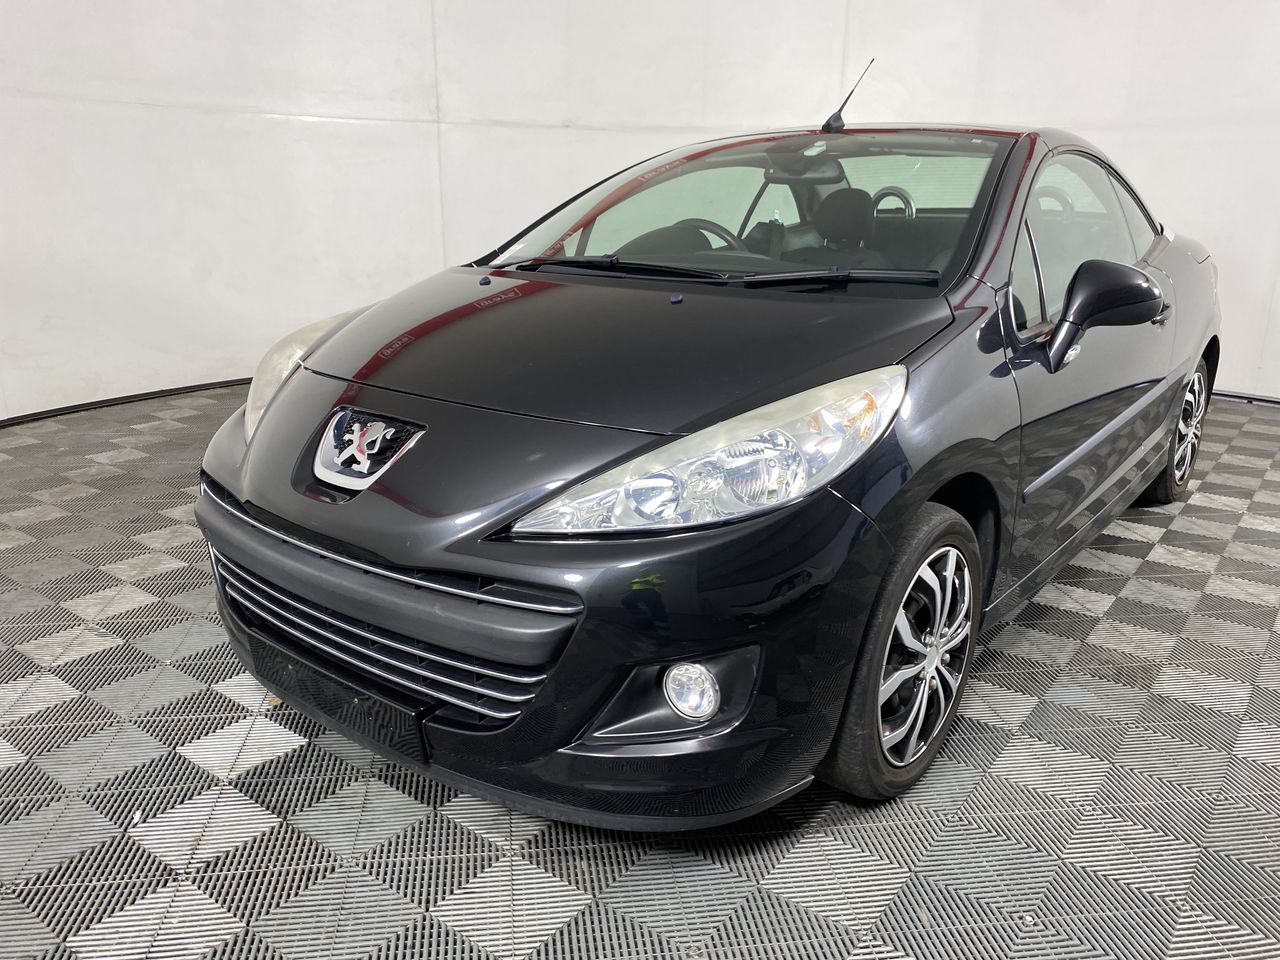 Interieur complet occasion Peugeot 207 phase 1 cabriolet